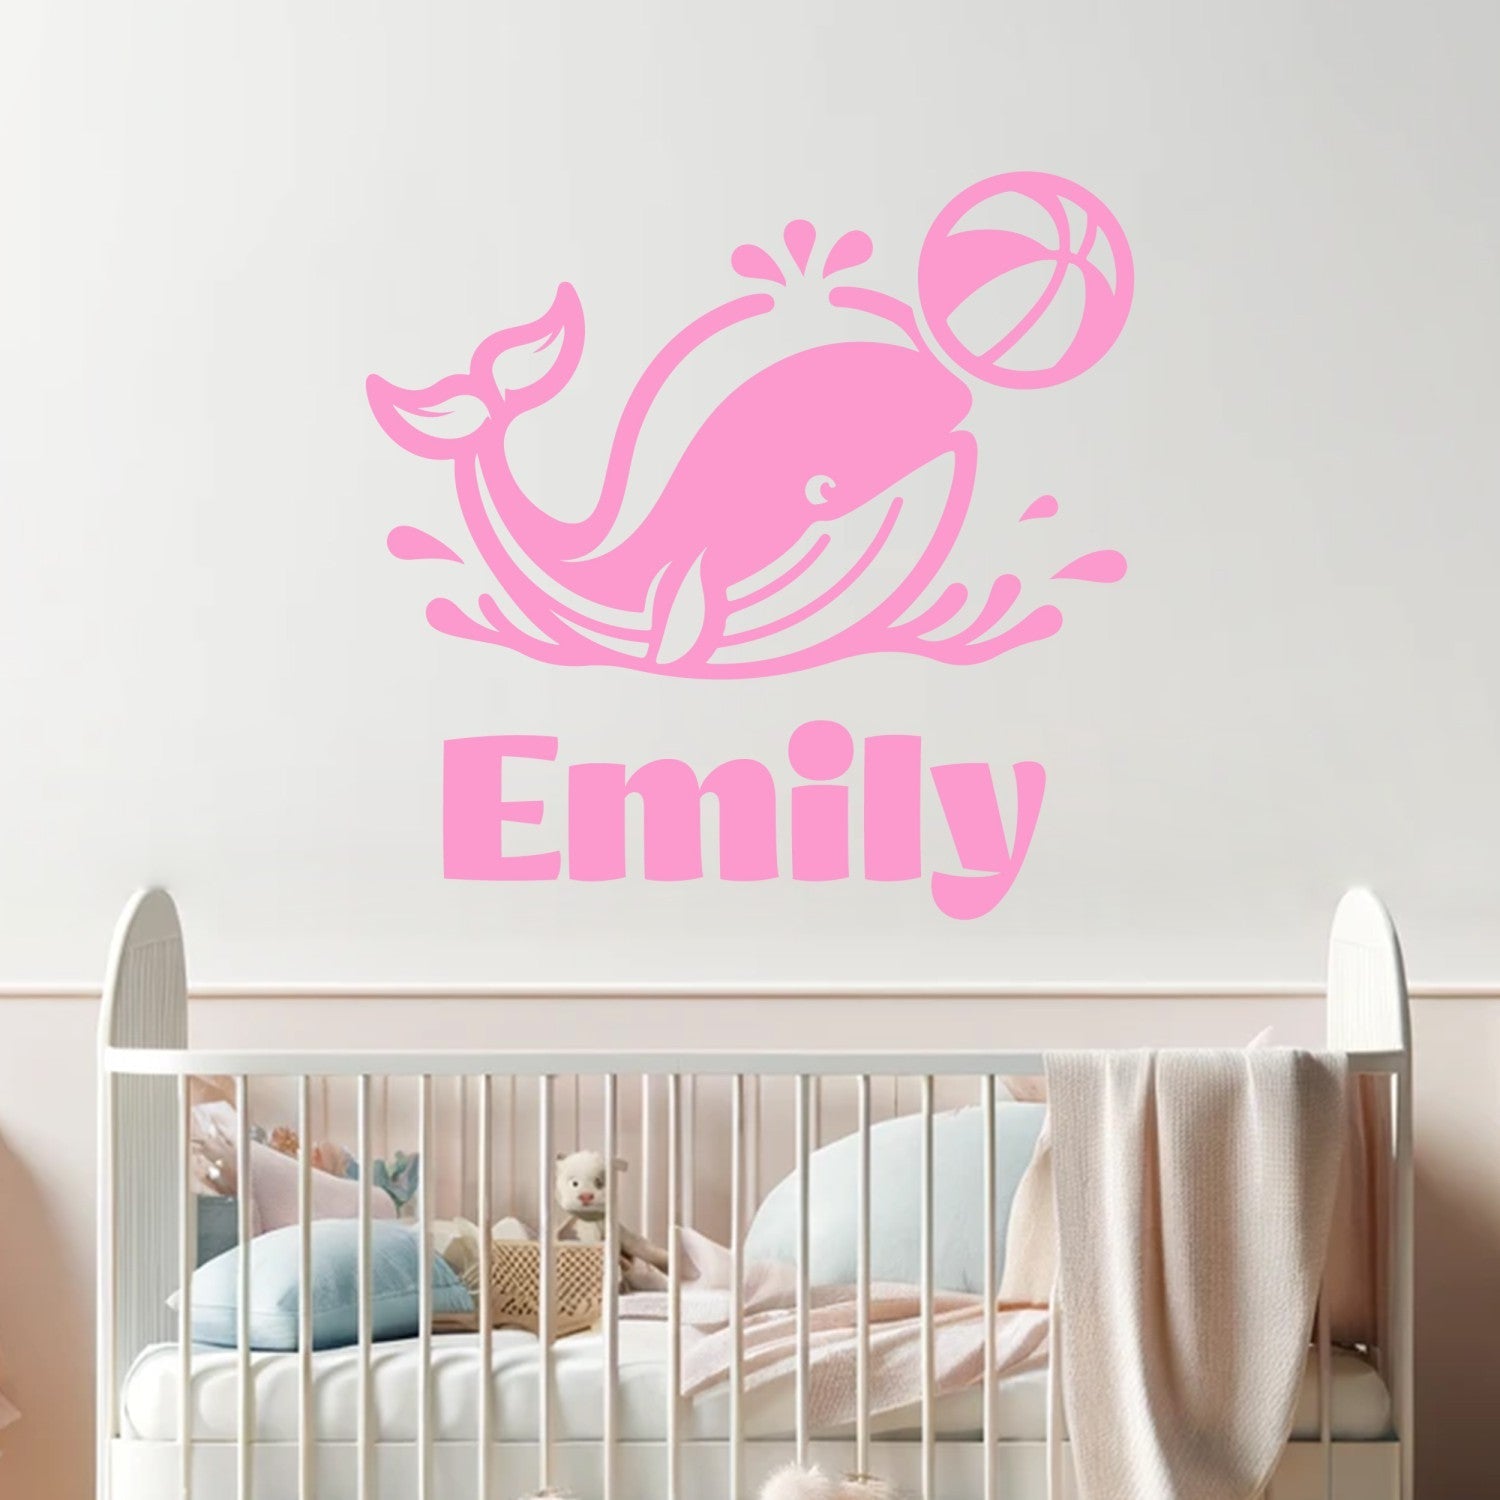 Cat Decals for Walls - Wall Stickers Animals - Personalized Name Decal for Nursery - Baby Wall Stickers with Animal Wall Decals - Cat Wall Stickers